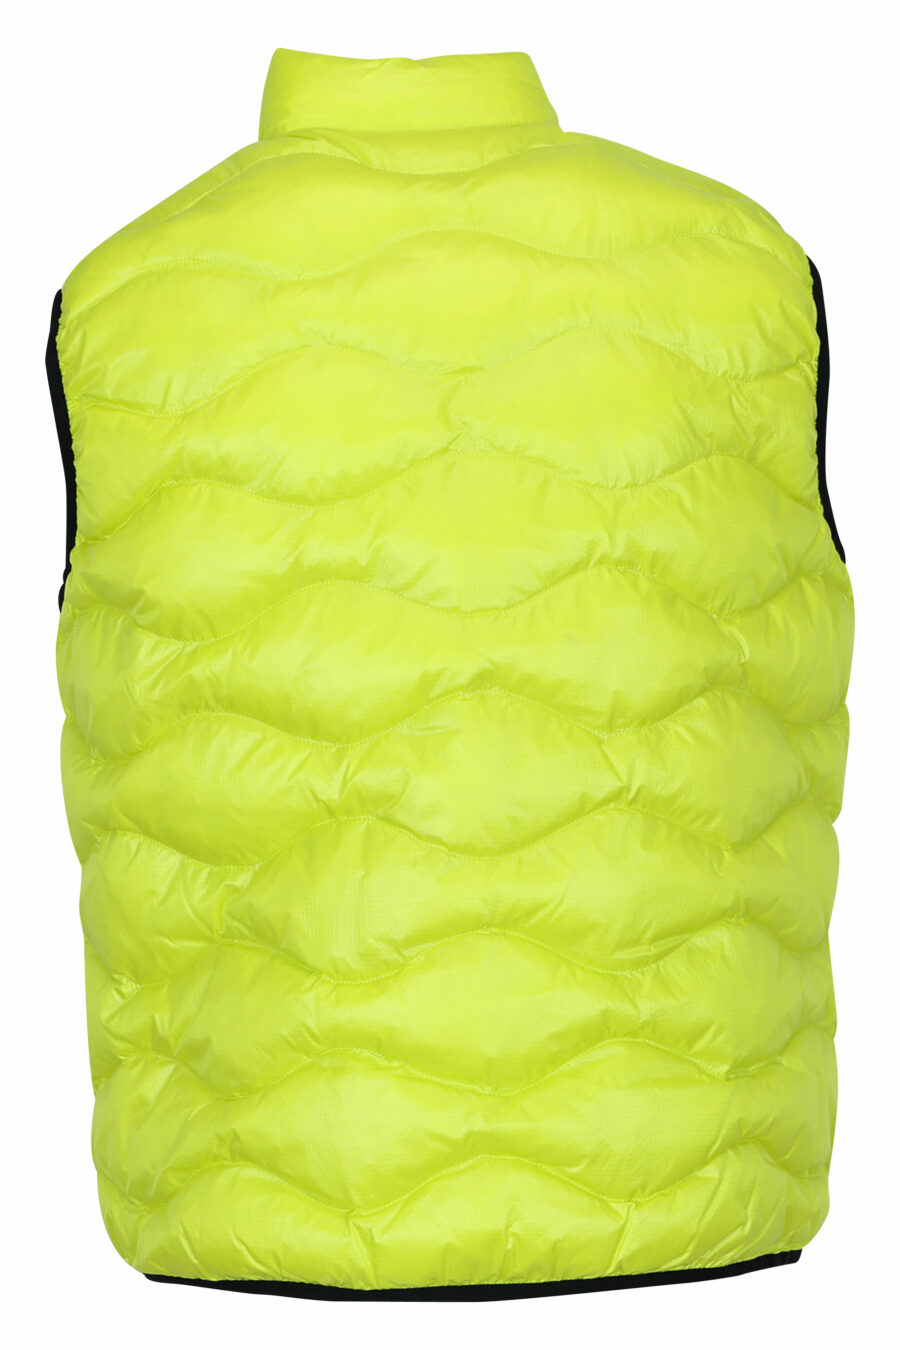 Yellow waistcoat with wavy lines and patch - 8058610785895 1